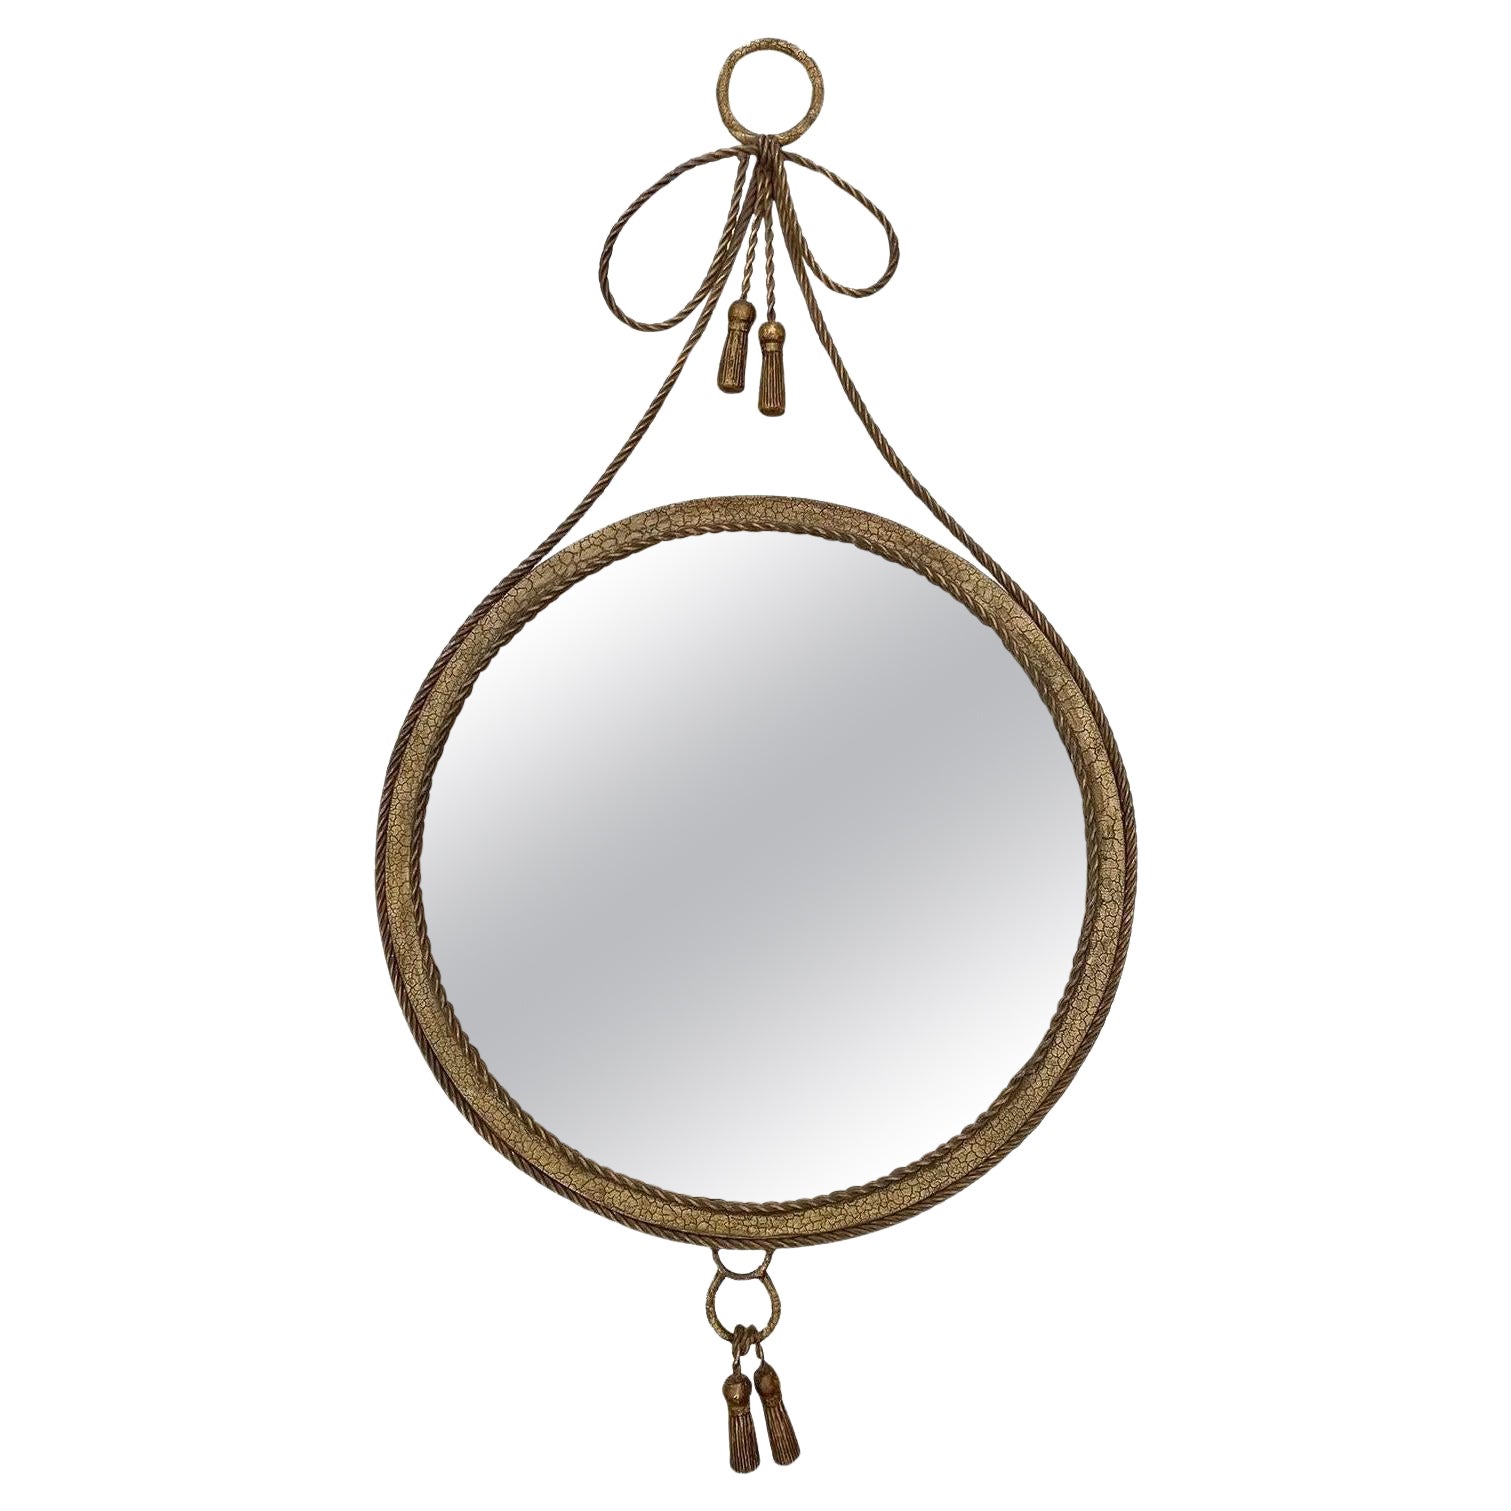 Surrealist Round Mirror with Twisted Metal Trim + Draped Tassels For Sale